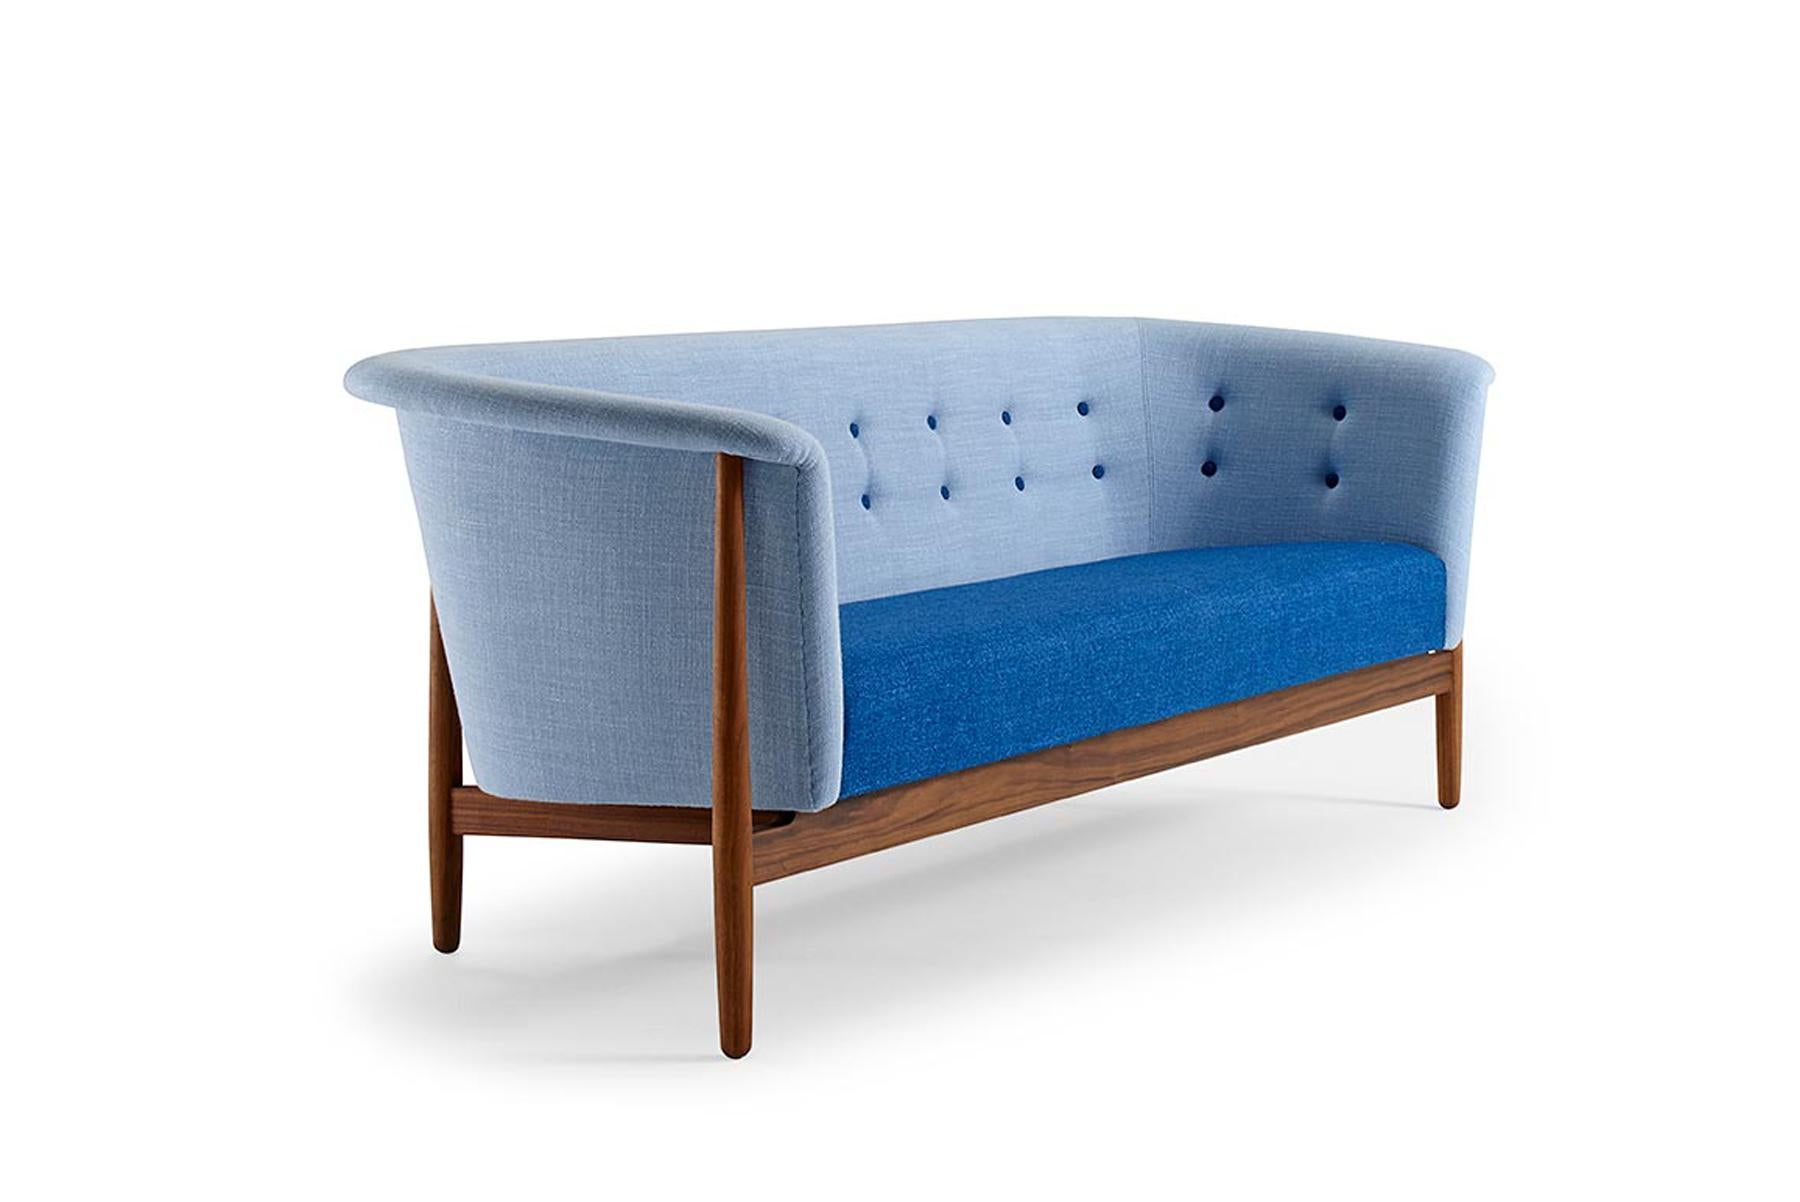 Designed by Nanna + Jørgen Ditzel in the 1950s, this stunning model is known as the Vita sofa. The silhouette pulls from traditional forms but is crafted in an open, organic design. Contrasting fabrics and button tufting adorn the upholstery